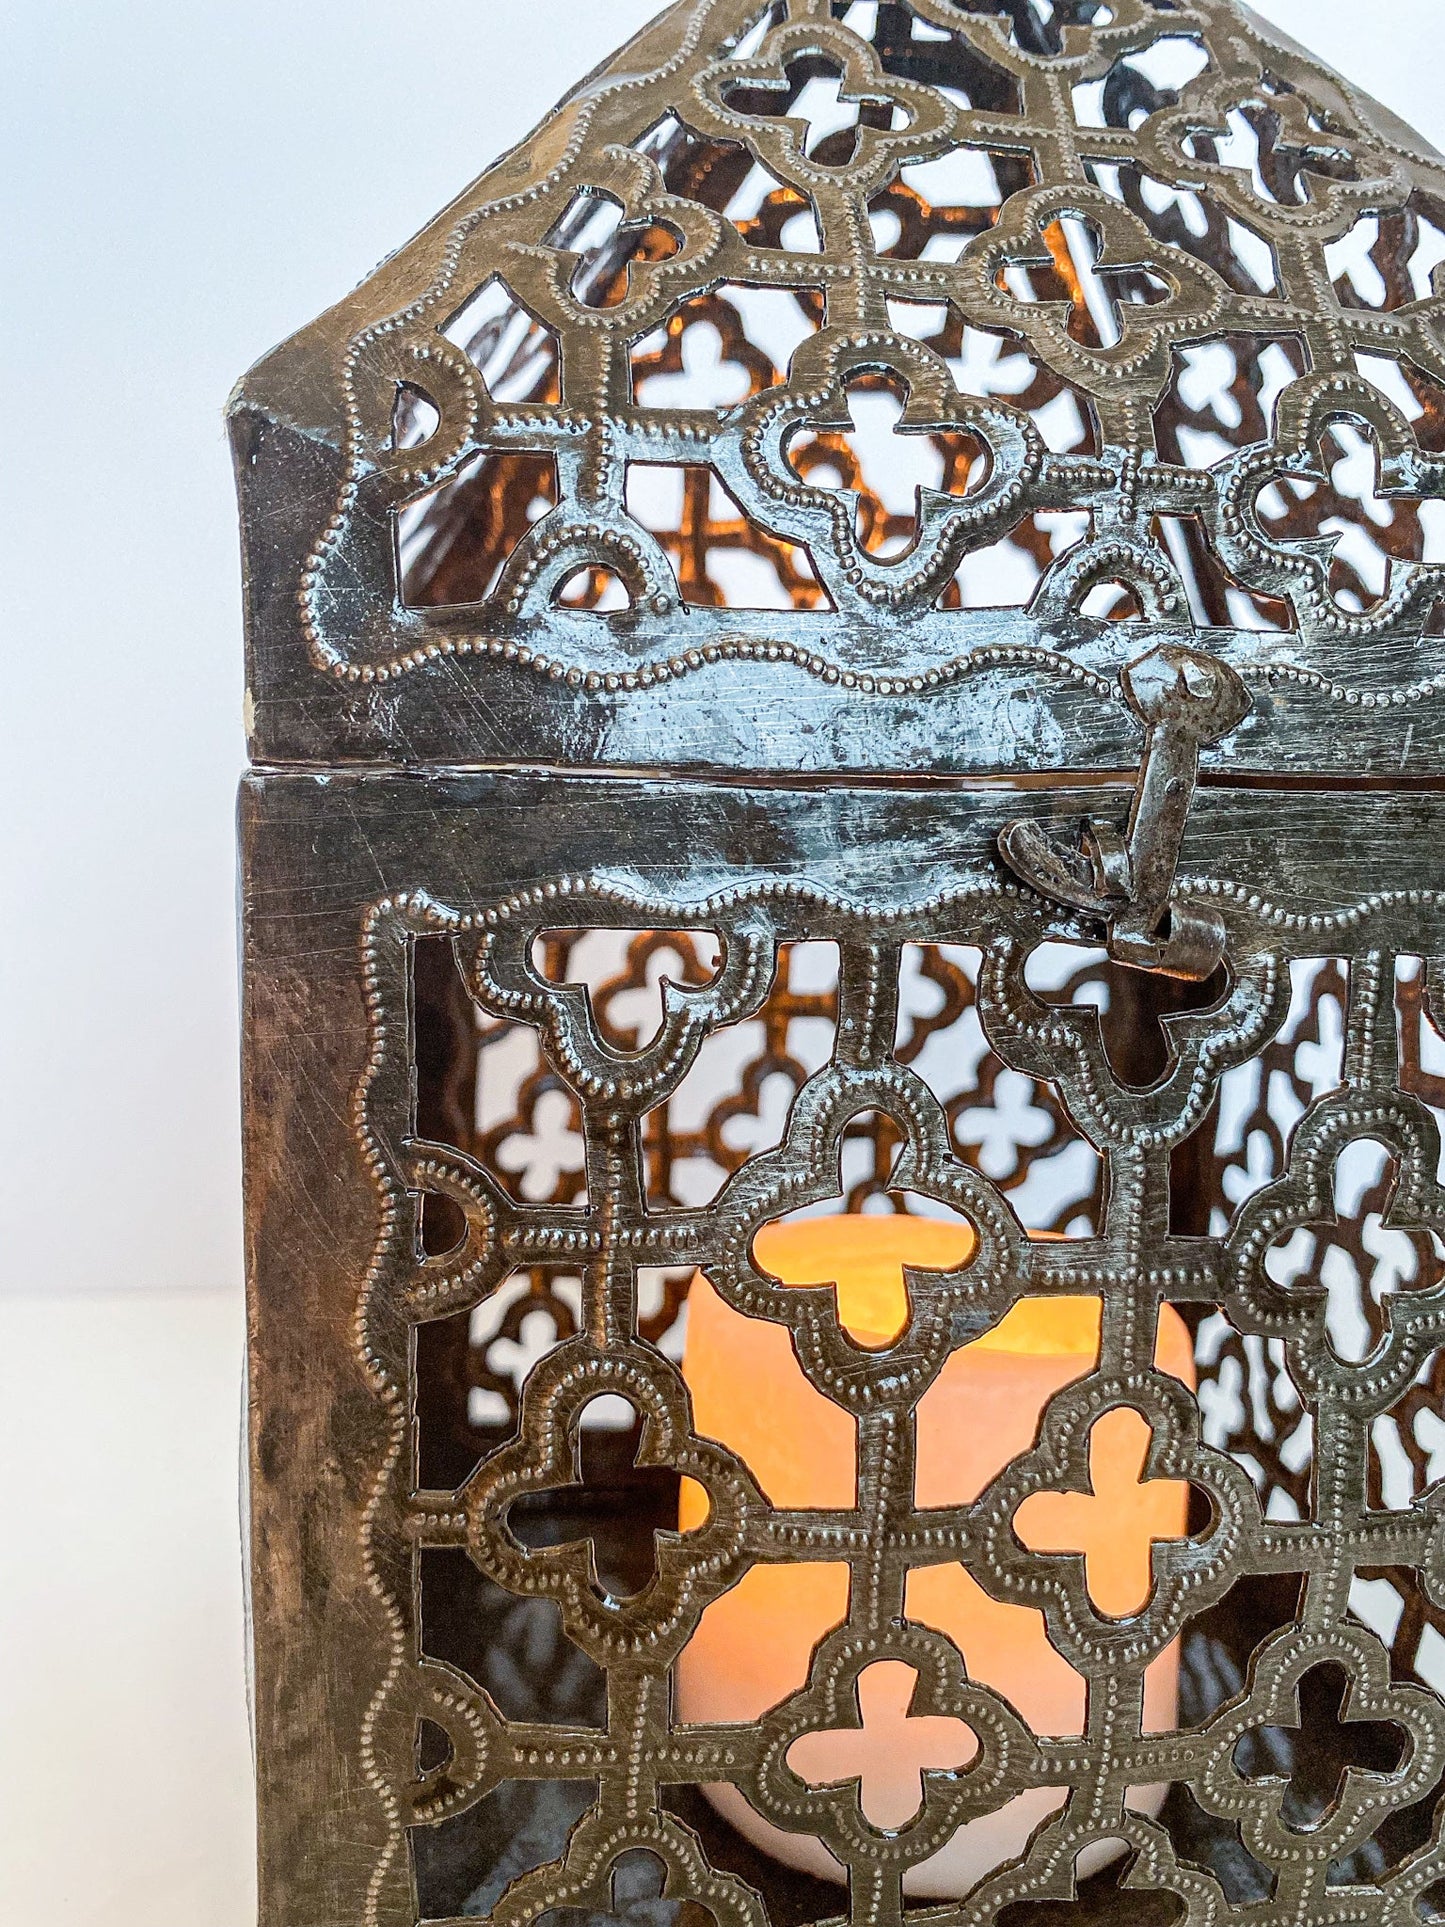 
                  
                    Recycled Metal Lantern by 2nd Story Goods
                  
                